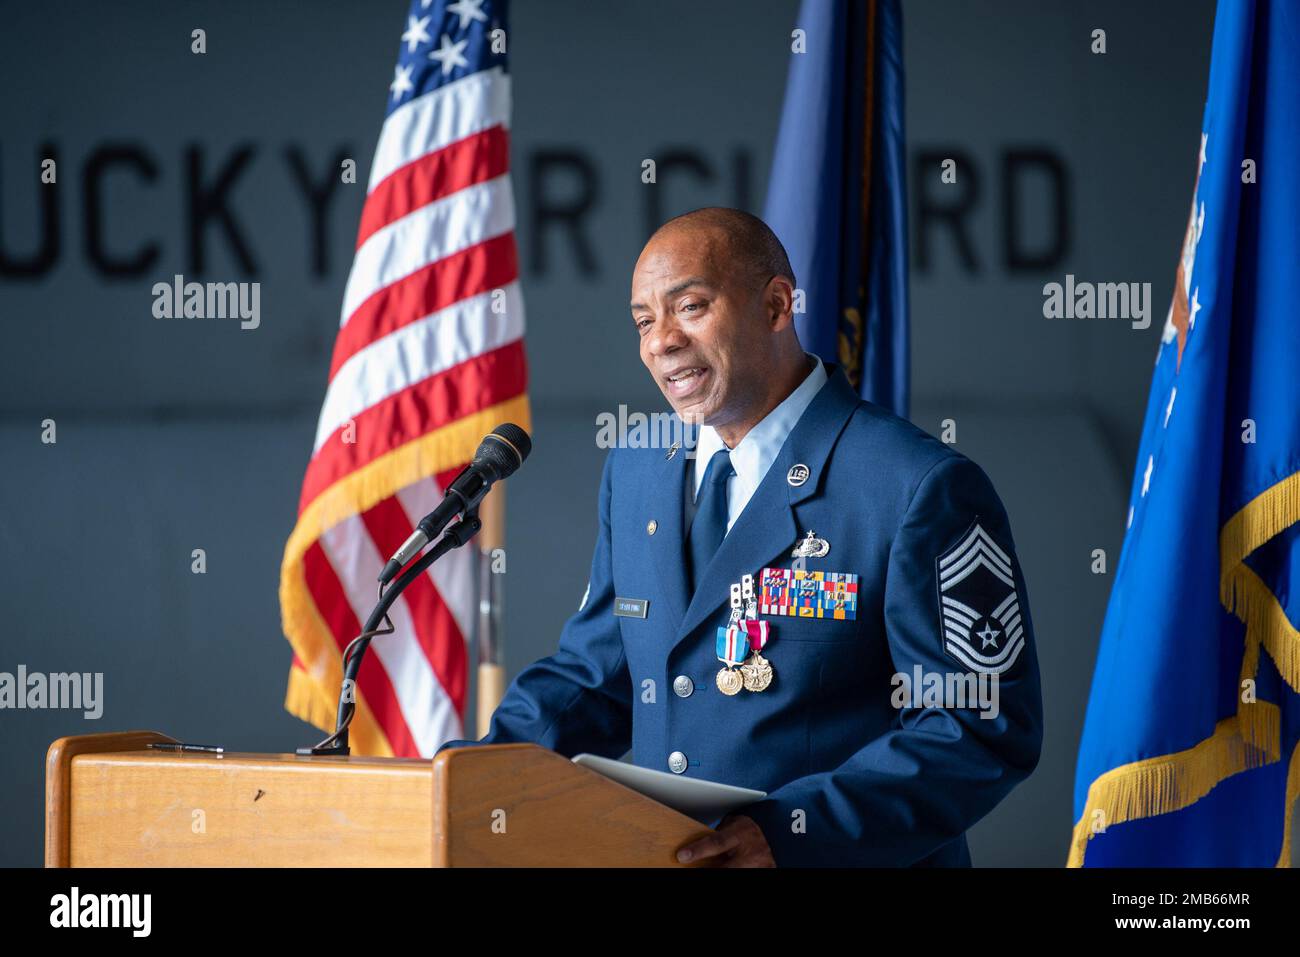 Chief Master Sgt. Gary L. Spaulding, military personnel management officer for the Kentucky Air National Guard, speaks to the audience during his retirement ceremony at the Kentucky Air National Guard Base in Louisville, Ky., June 12, 2022. Spaulding served 35 in the Kentucky Air Guard. Stock Photo